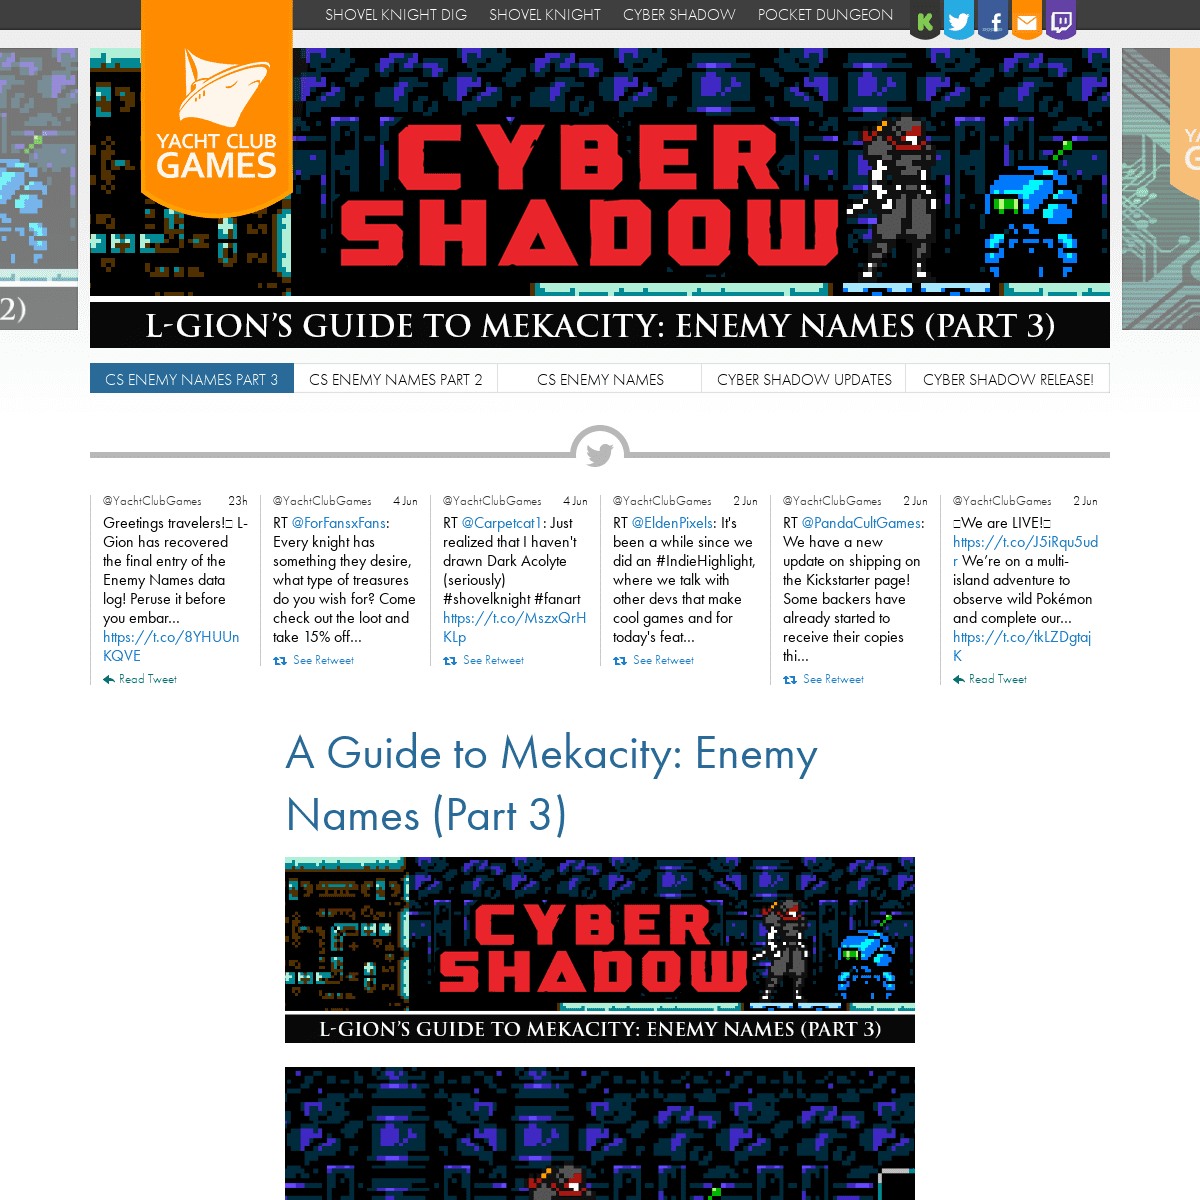 A complete backup of https://yachtclubgames.com